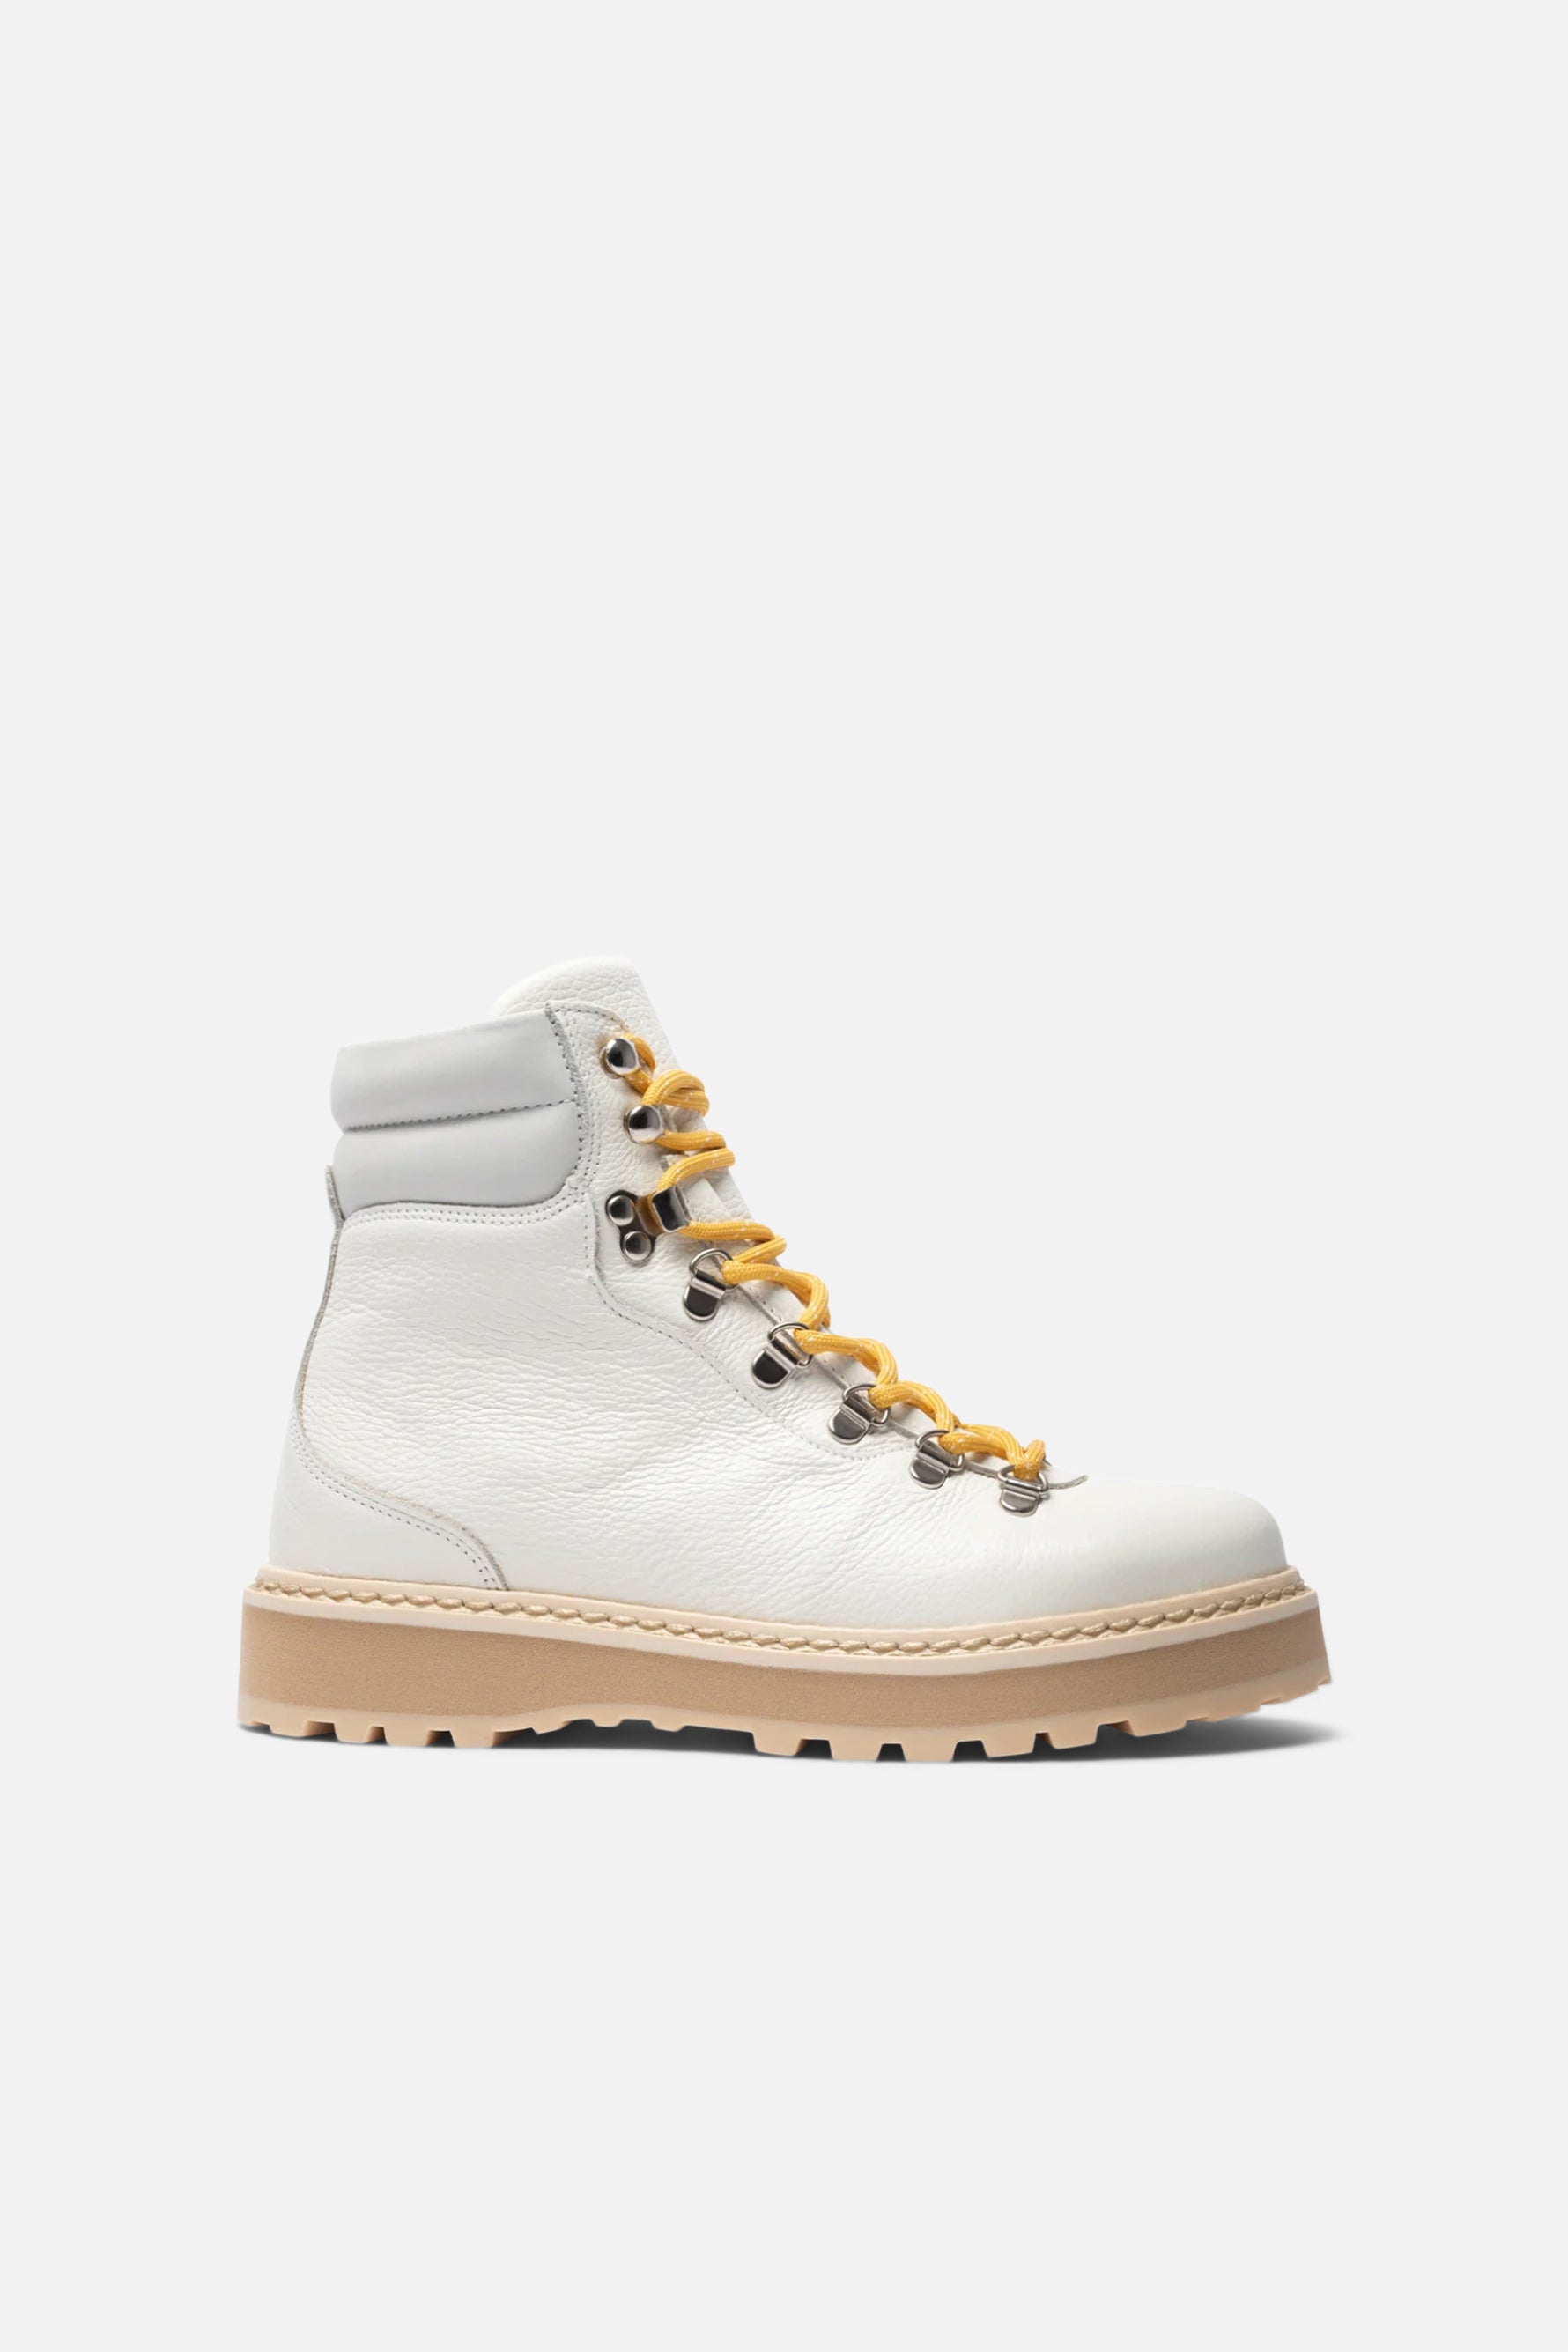 Mono Hiking Leather Shearling Lining Boot in Off White | BANDIER - BANDIER